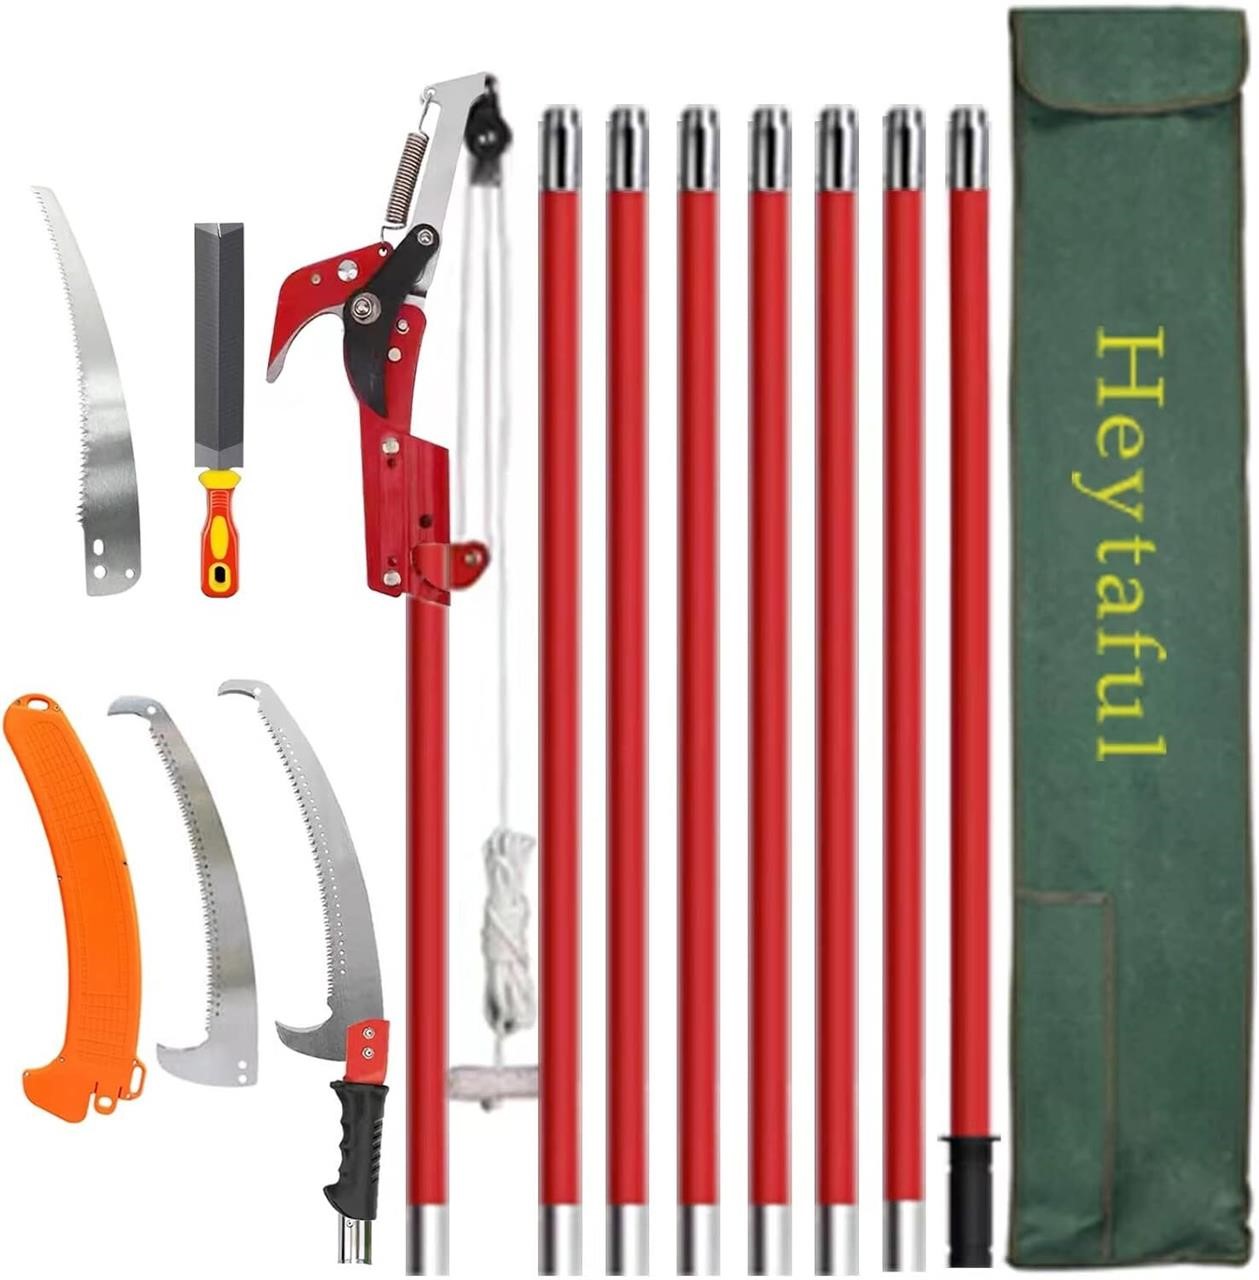 26Ft Tree Pole Pruner Manual Saw (Red) 27Ft